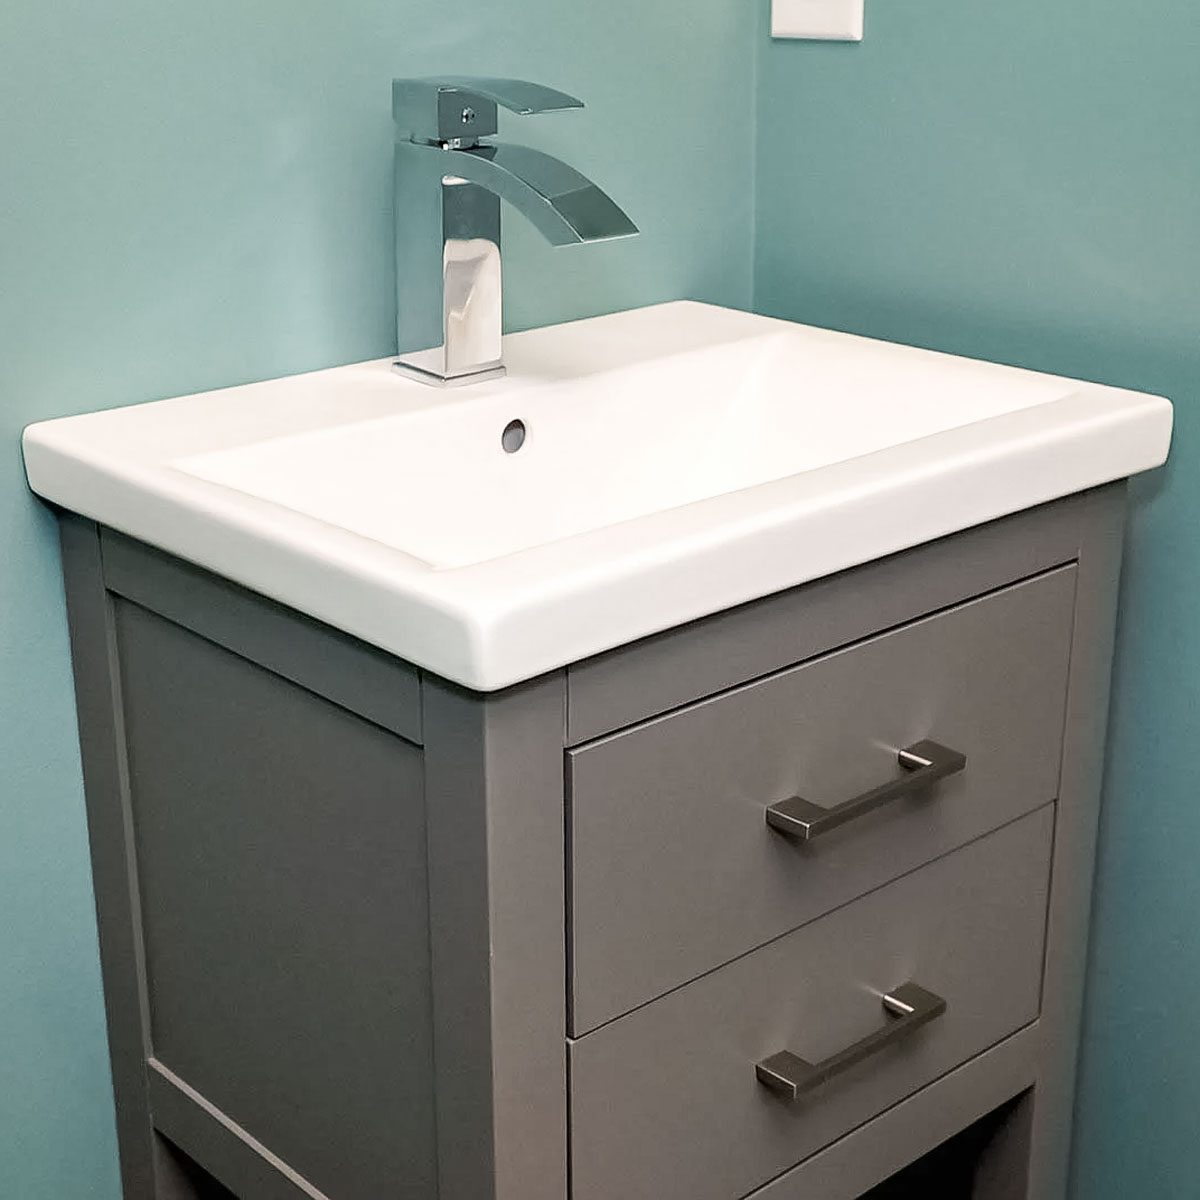 How To Install A New Bathroom Vanity And Sink